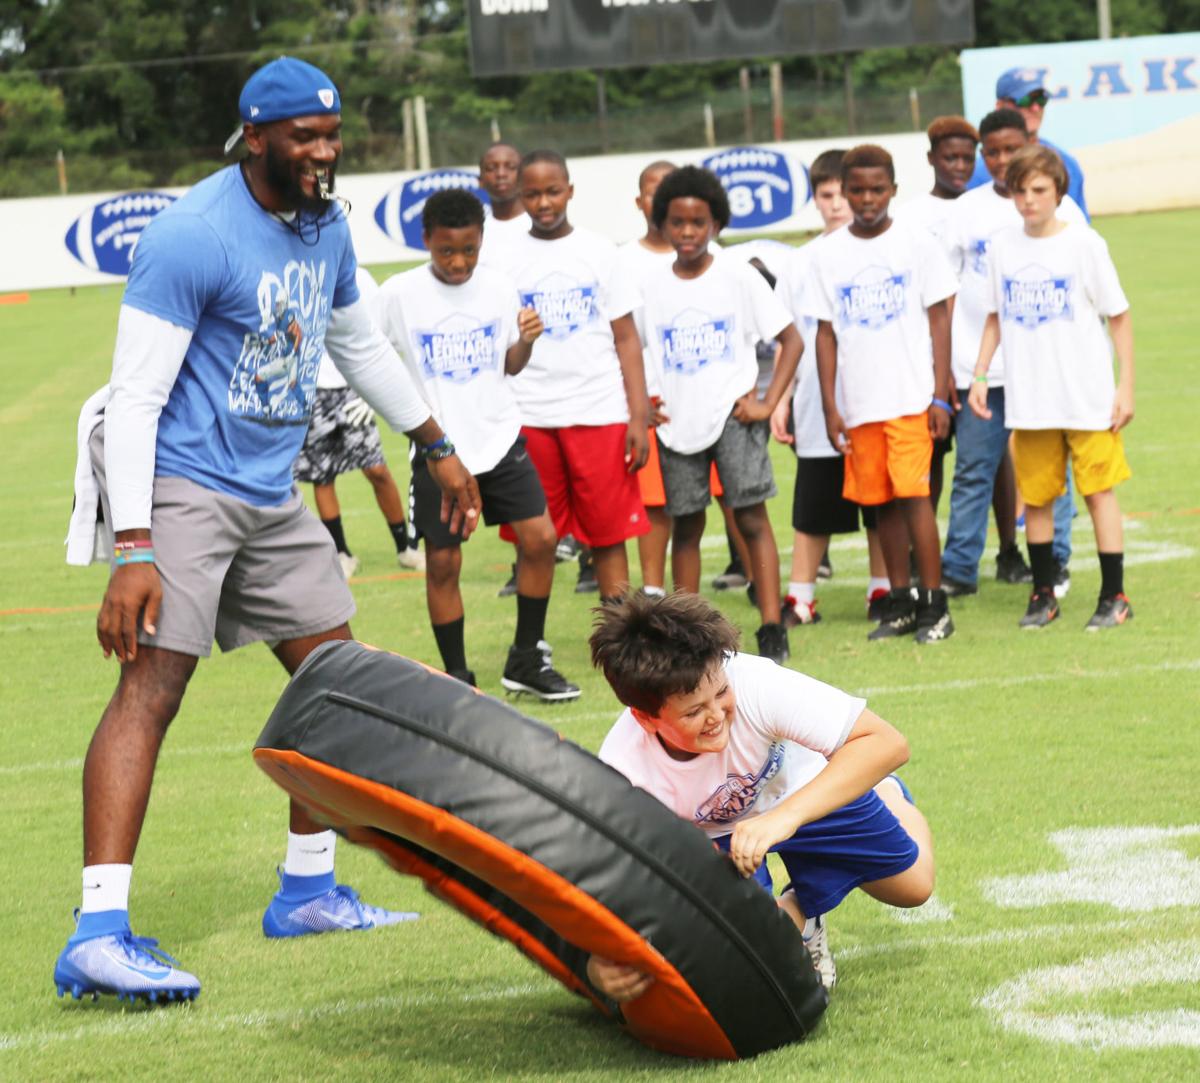 Nfls Top Defensive Rookie Leonard Gives Back With Lake View